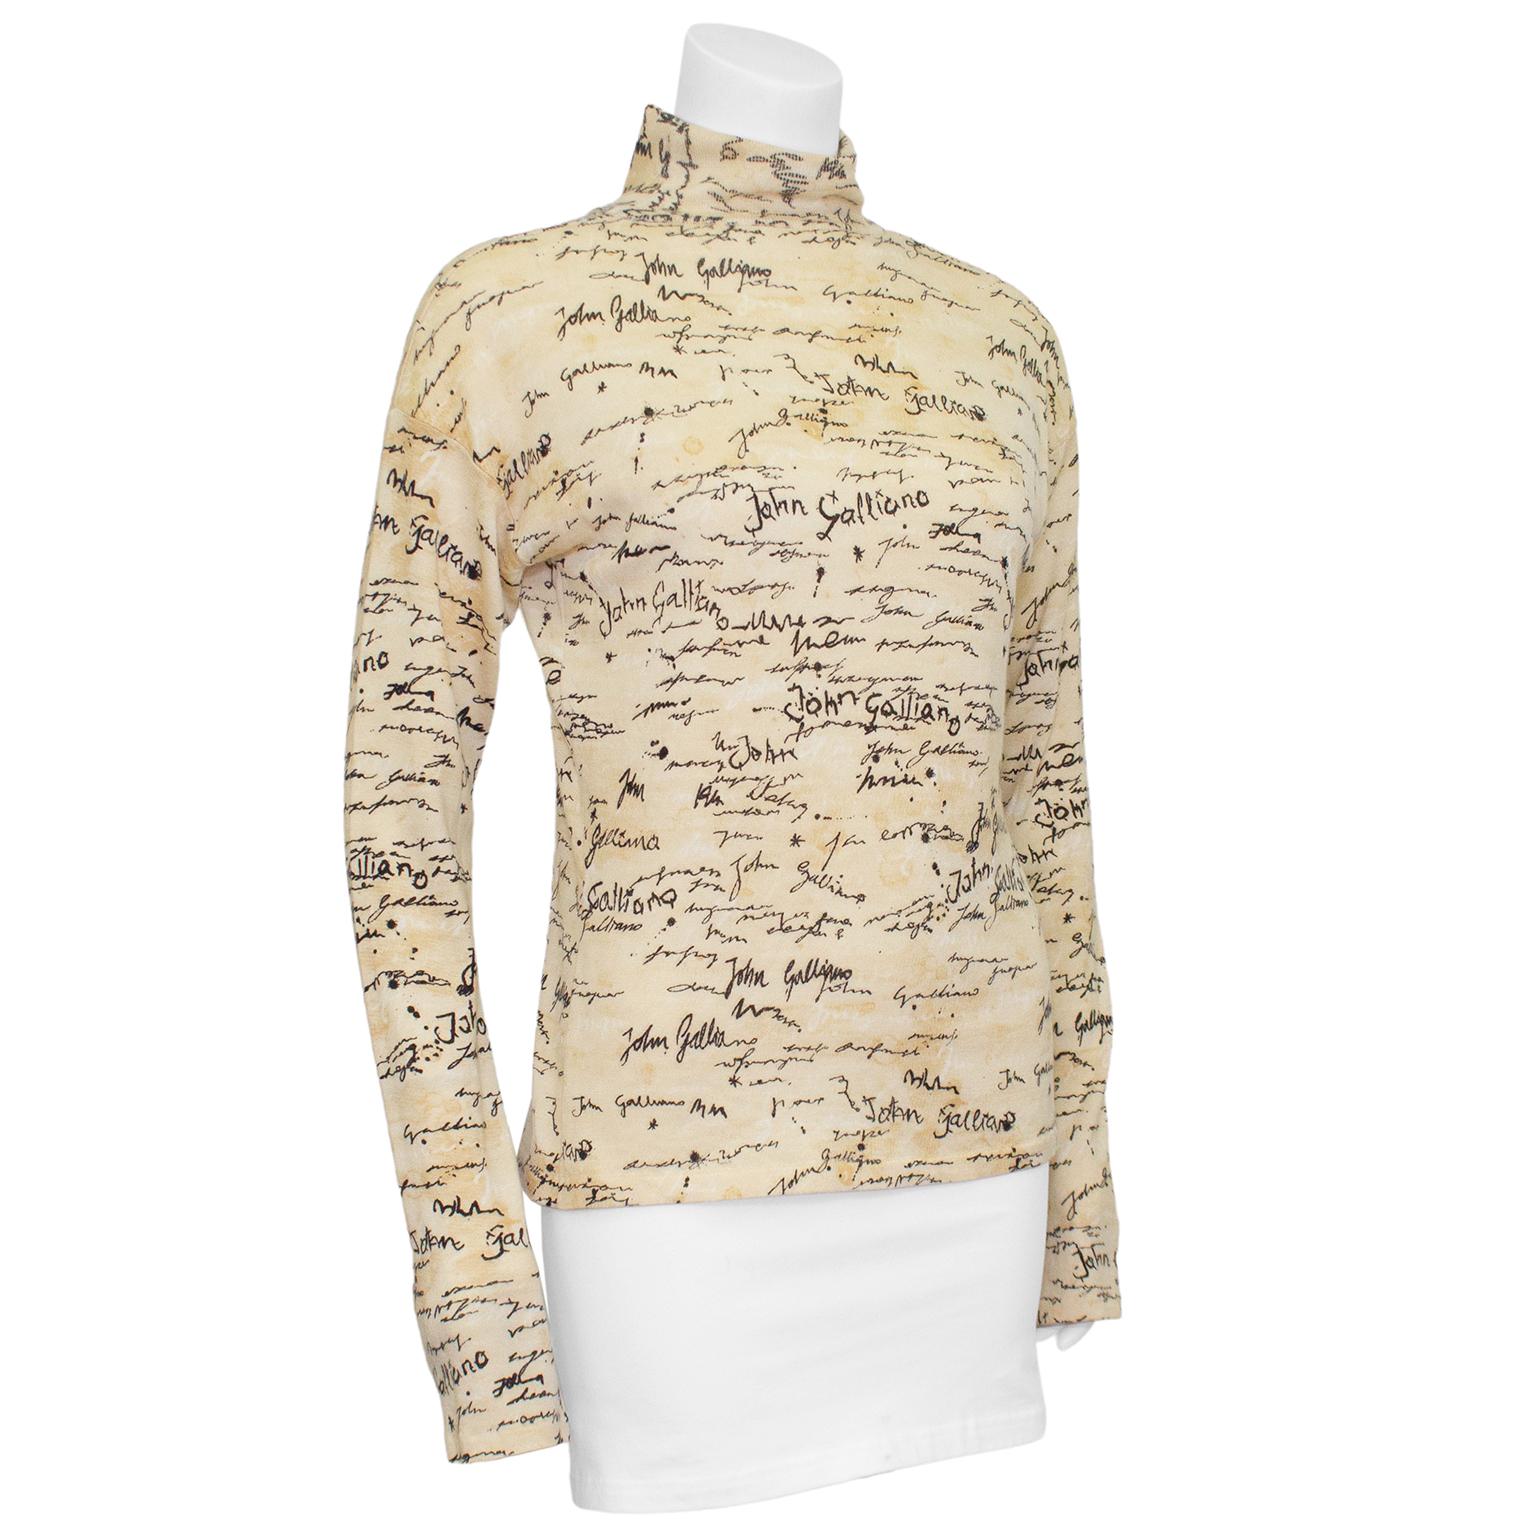 John Gallino turtleneck from the earlt 1990s. Fabric has been designed to look like tea soaked old scripts with John Galliano printed all over in different types of hand writing. Slightly elongated sleeves. Ribbed at neck with unfinished hem that